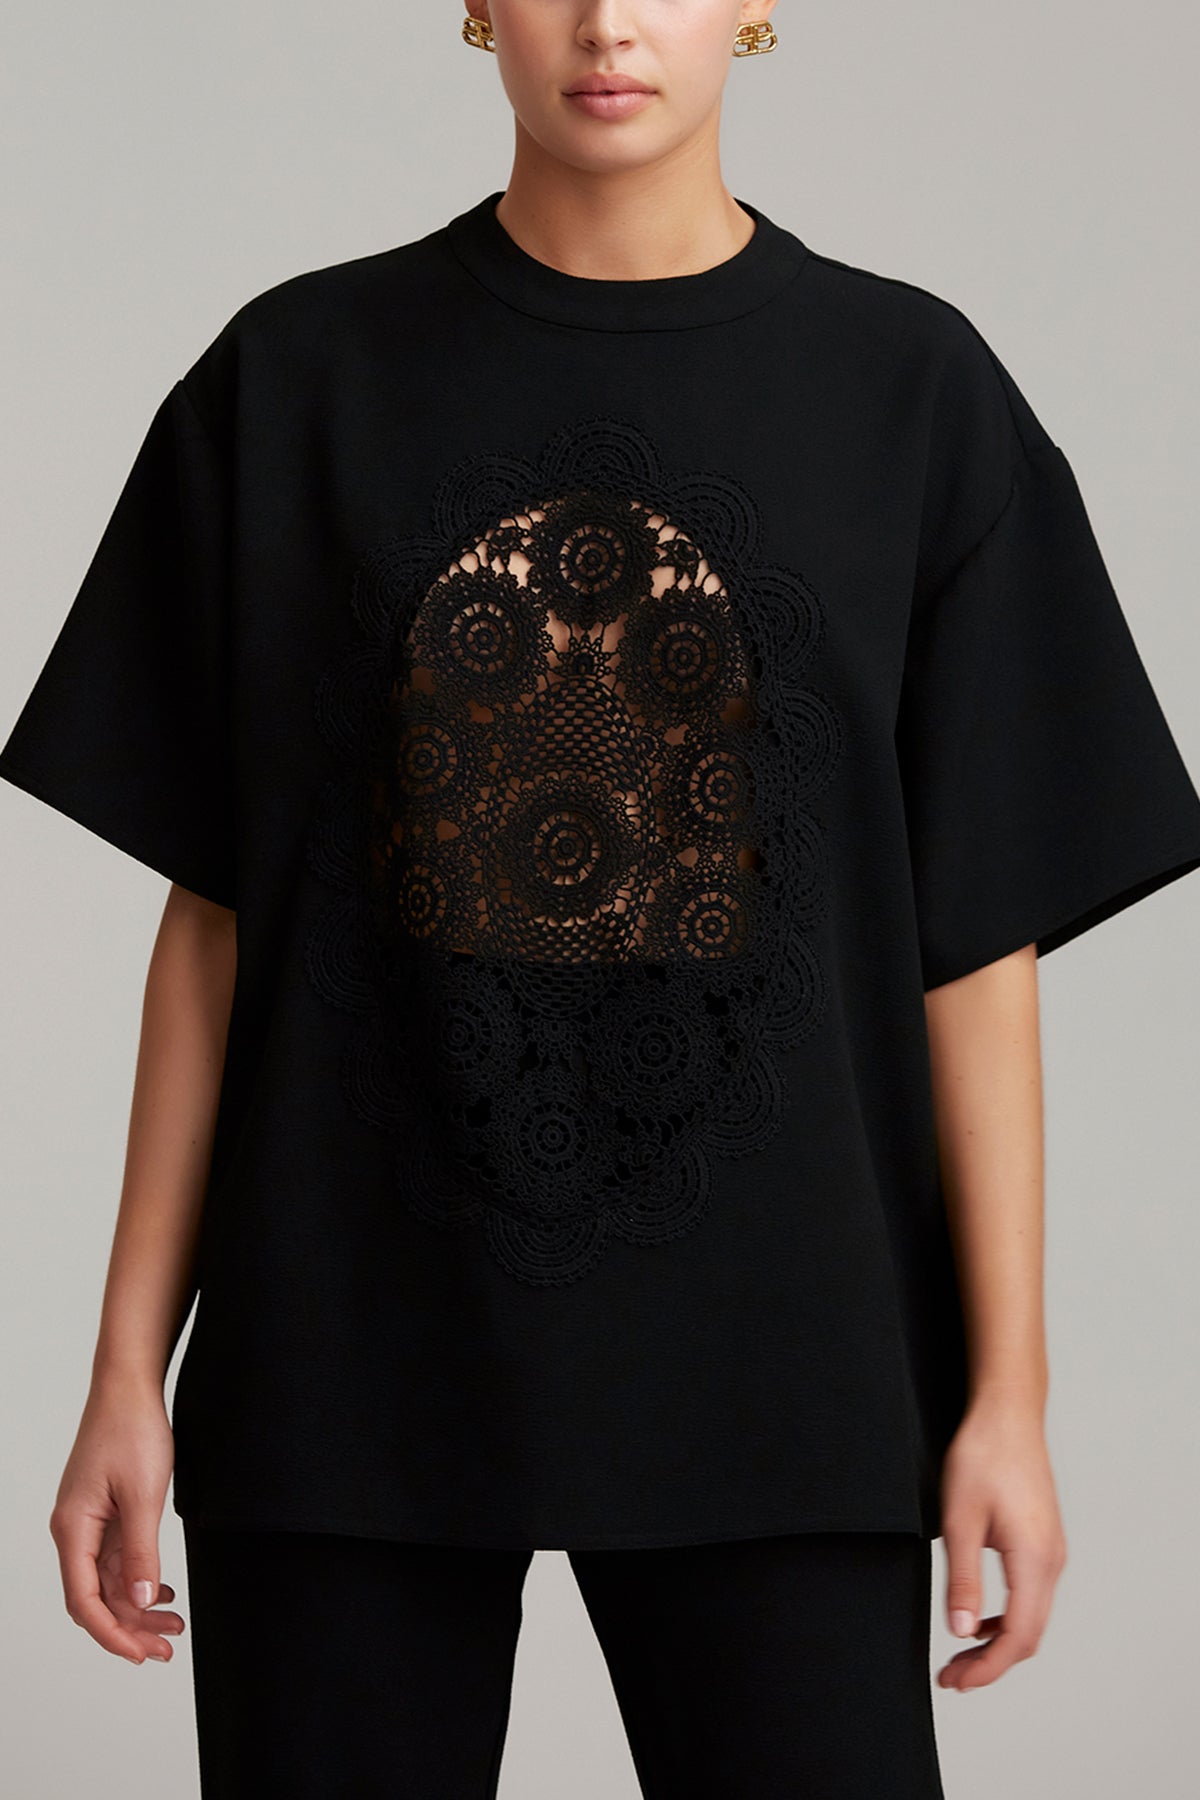 C/MEO Collective - Moments Ago T-Shirt - Black